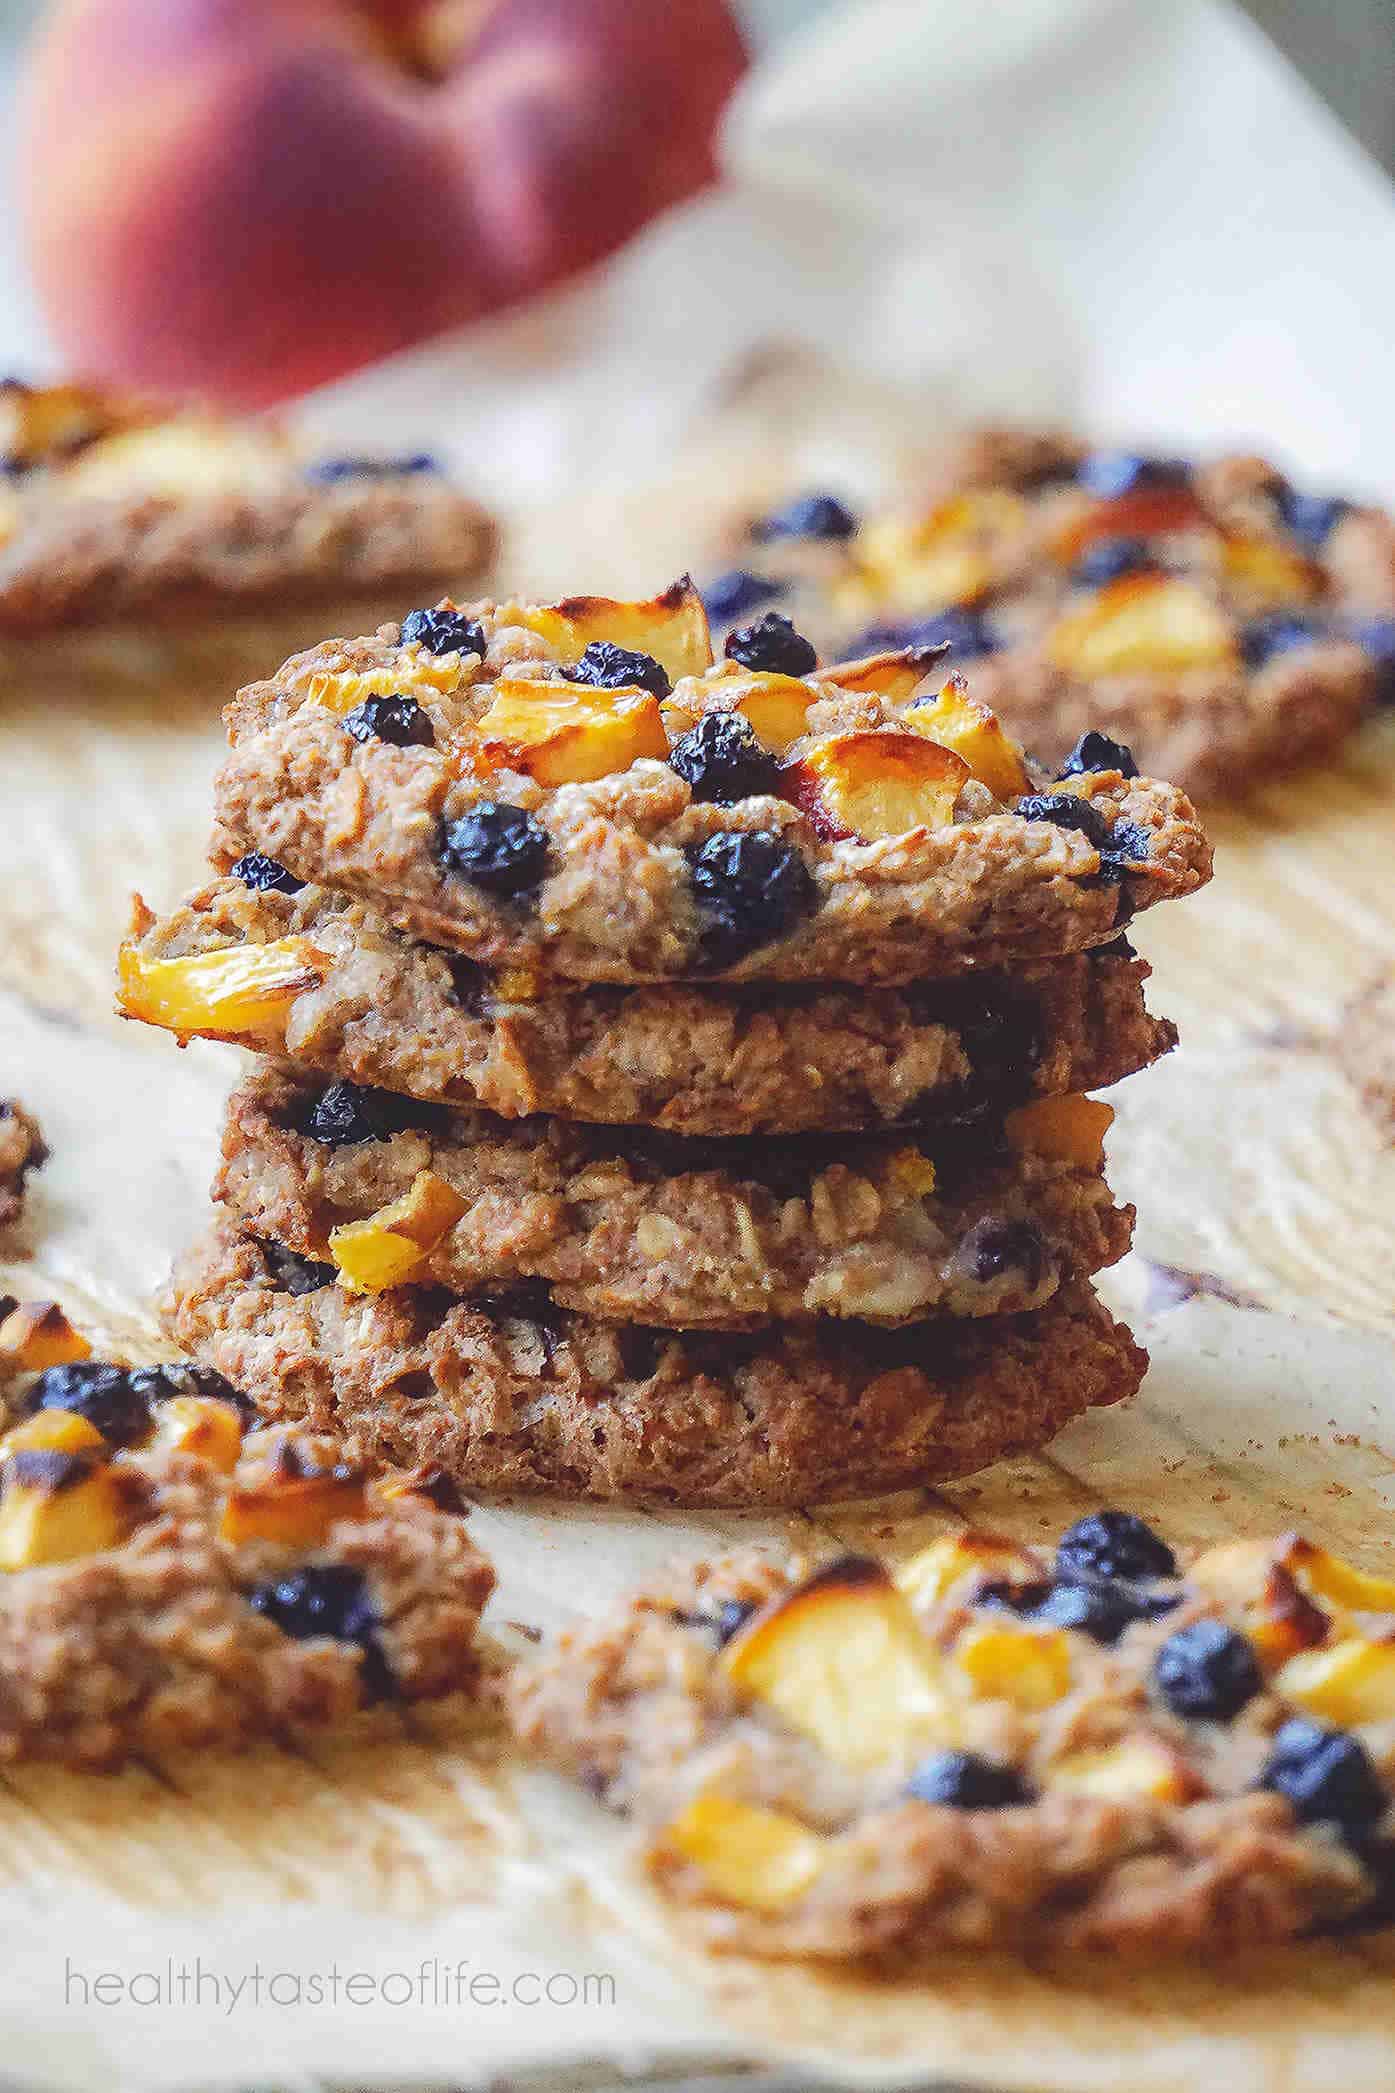 Healthy Peach Blueberry Oatmeal Cookies Recipe – vegan, dairy free, egg free, no refined sugar, no butter.